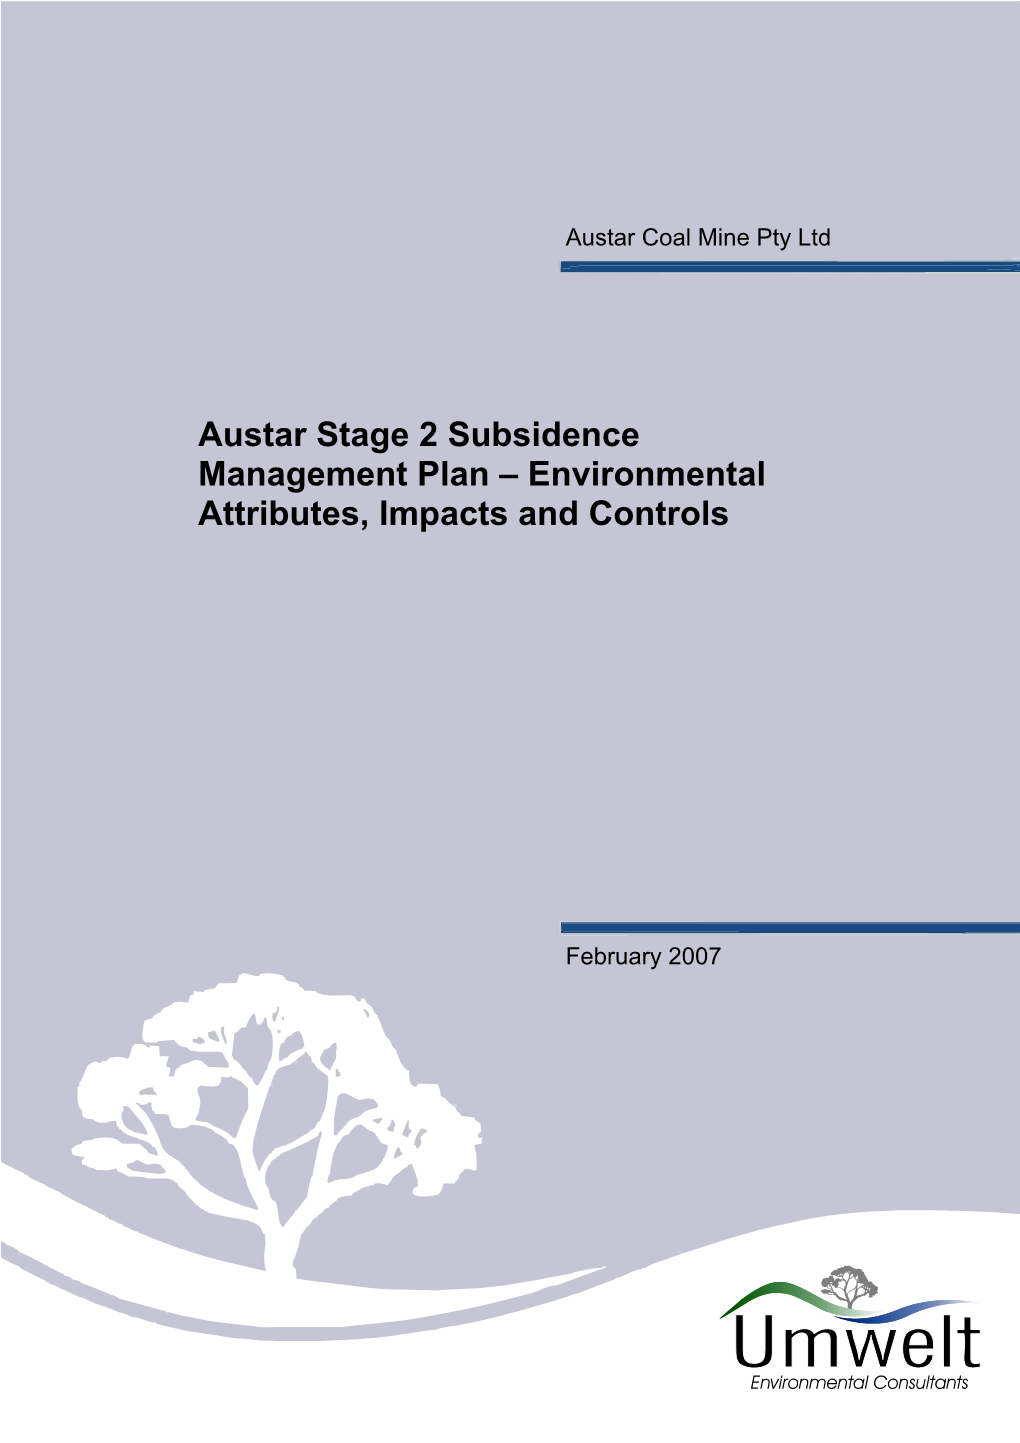 Austar Stage 2 Subsidence Management Plan – Environmental Attributes, Impacts and Controls